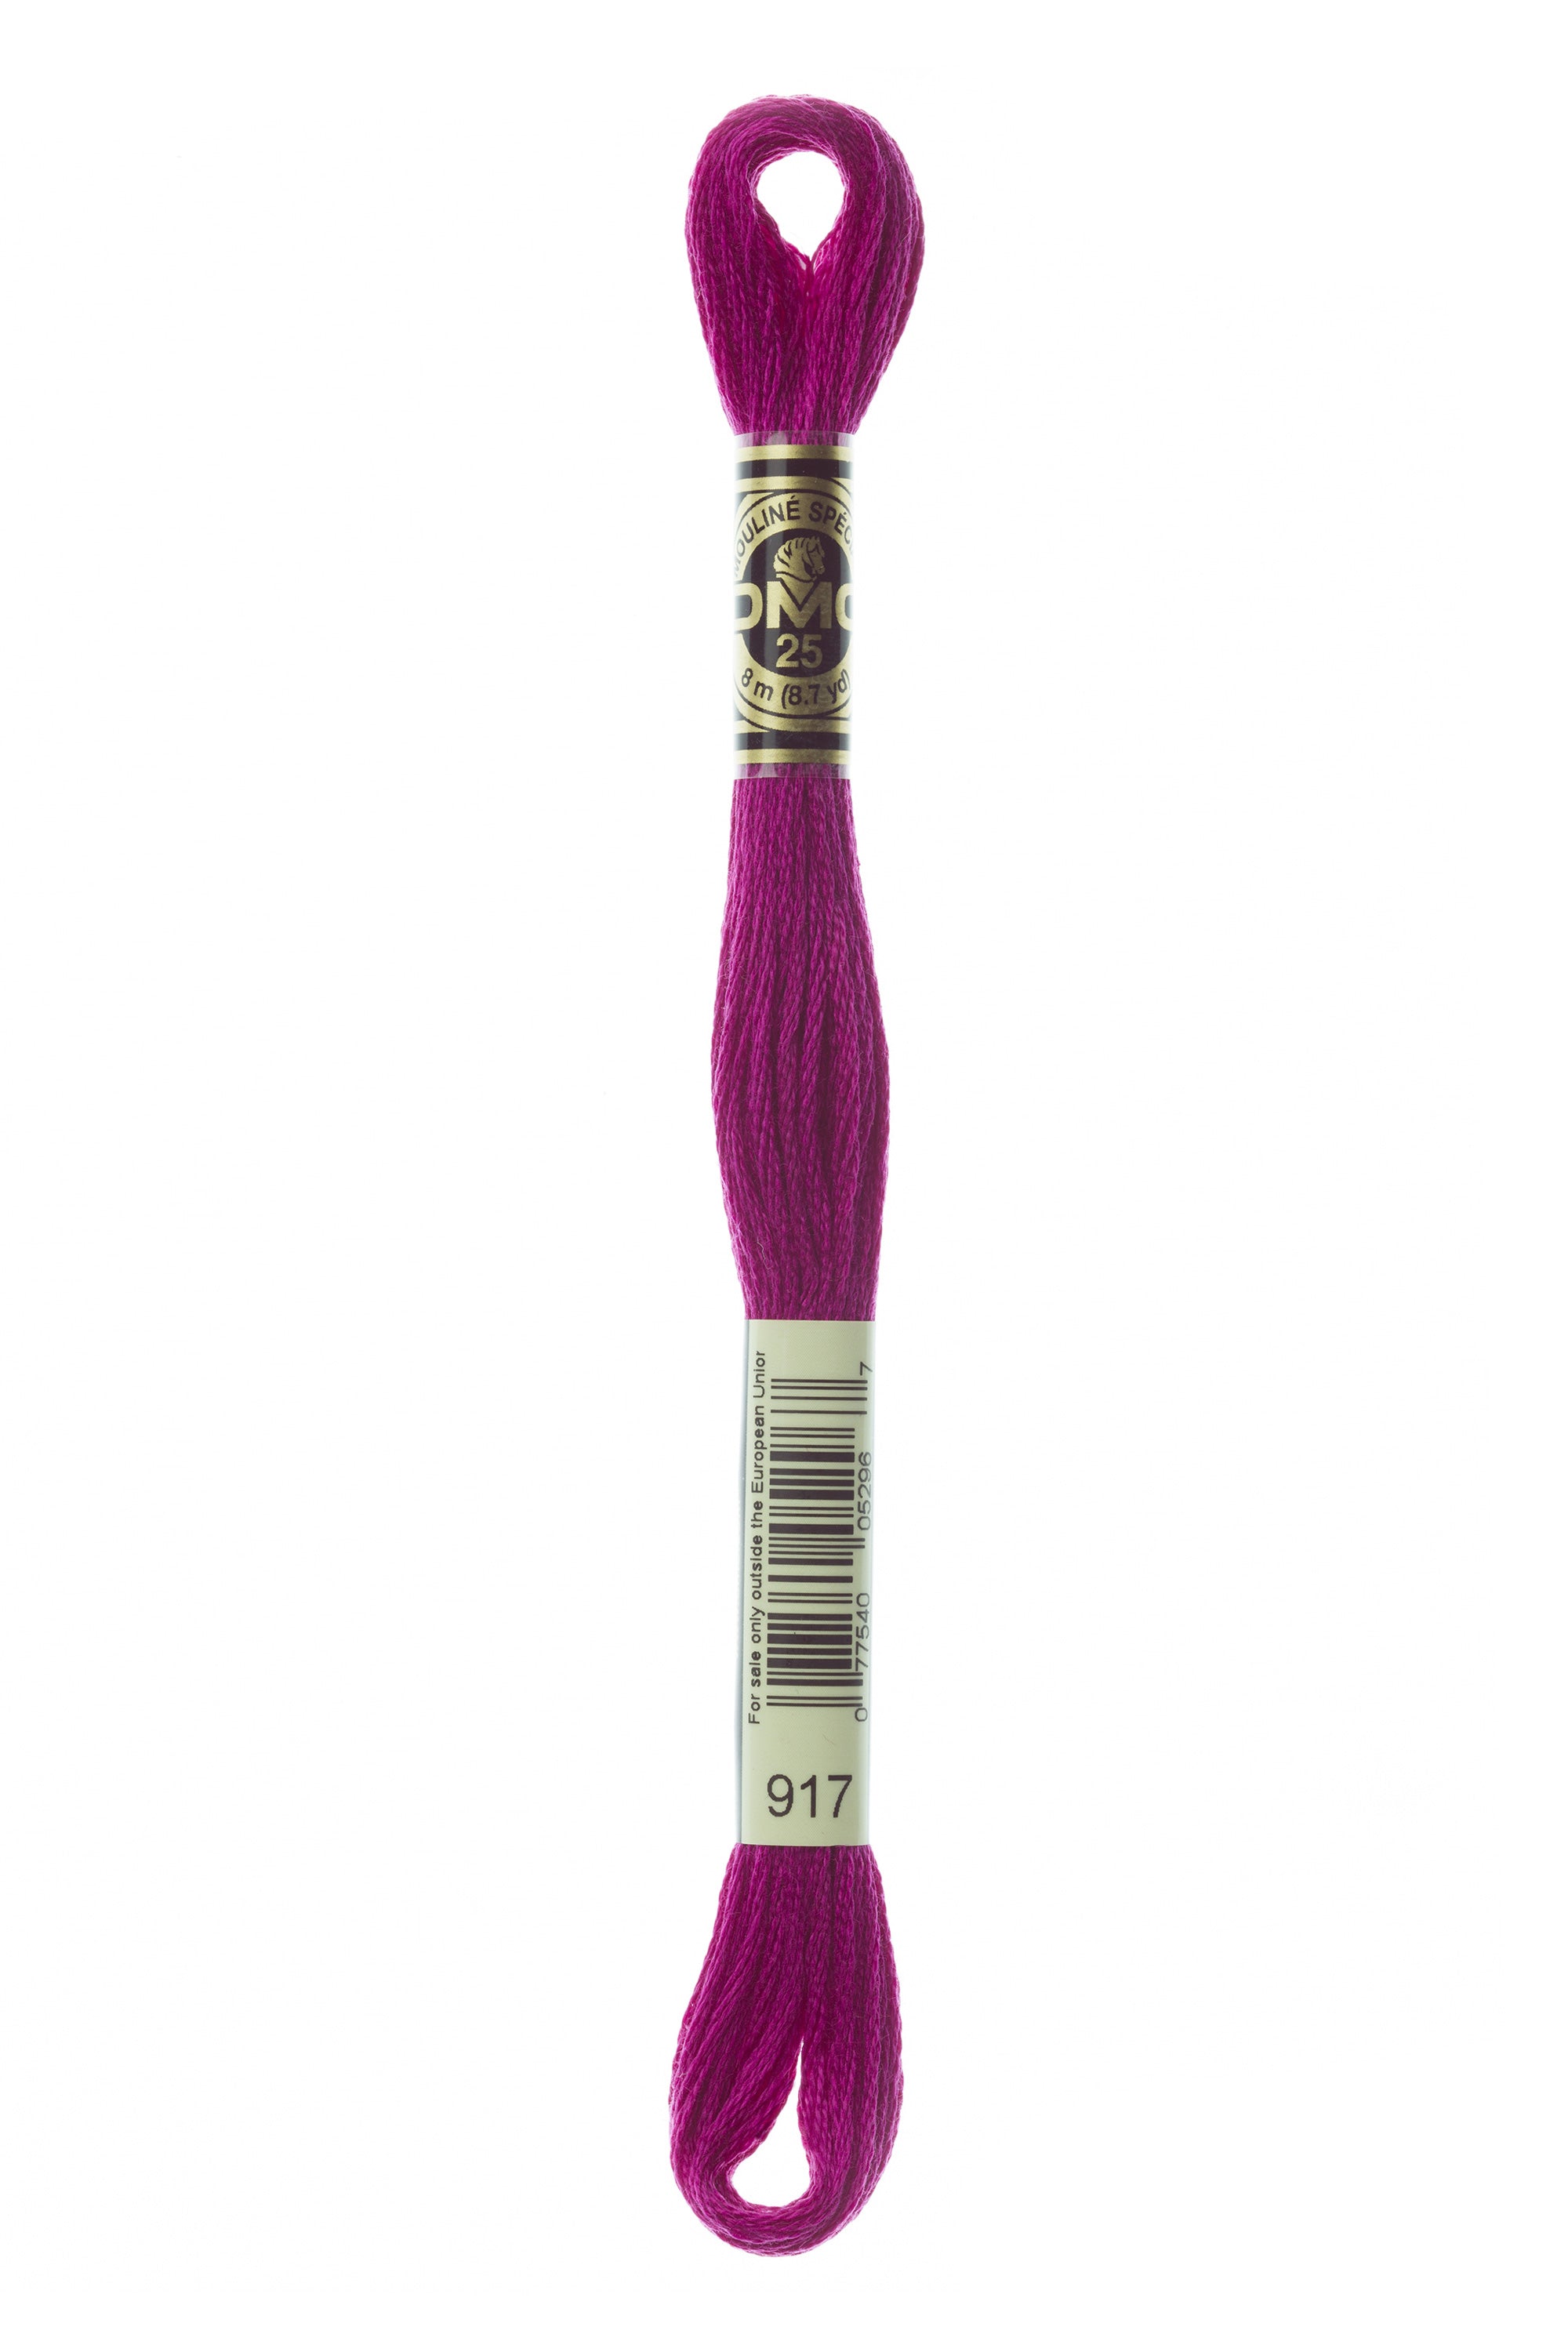 Cotton Six Stranded Embroidery Floss | DMC 3856-3866